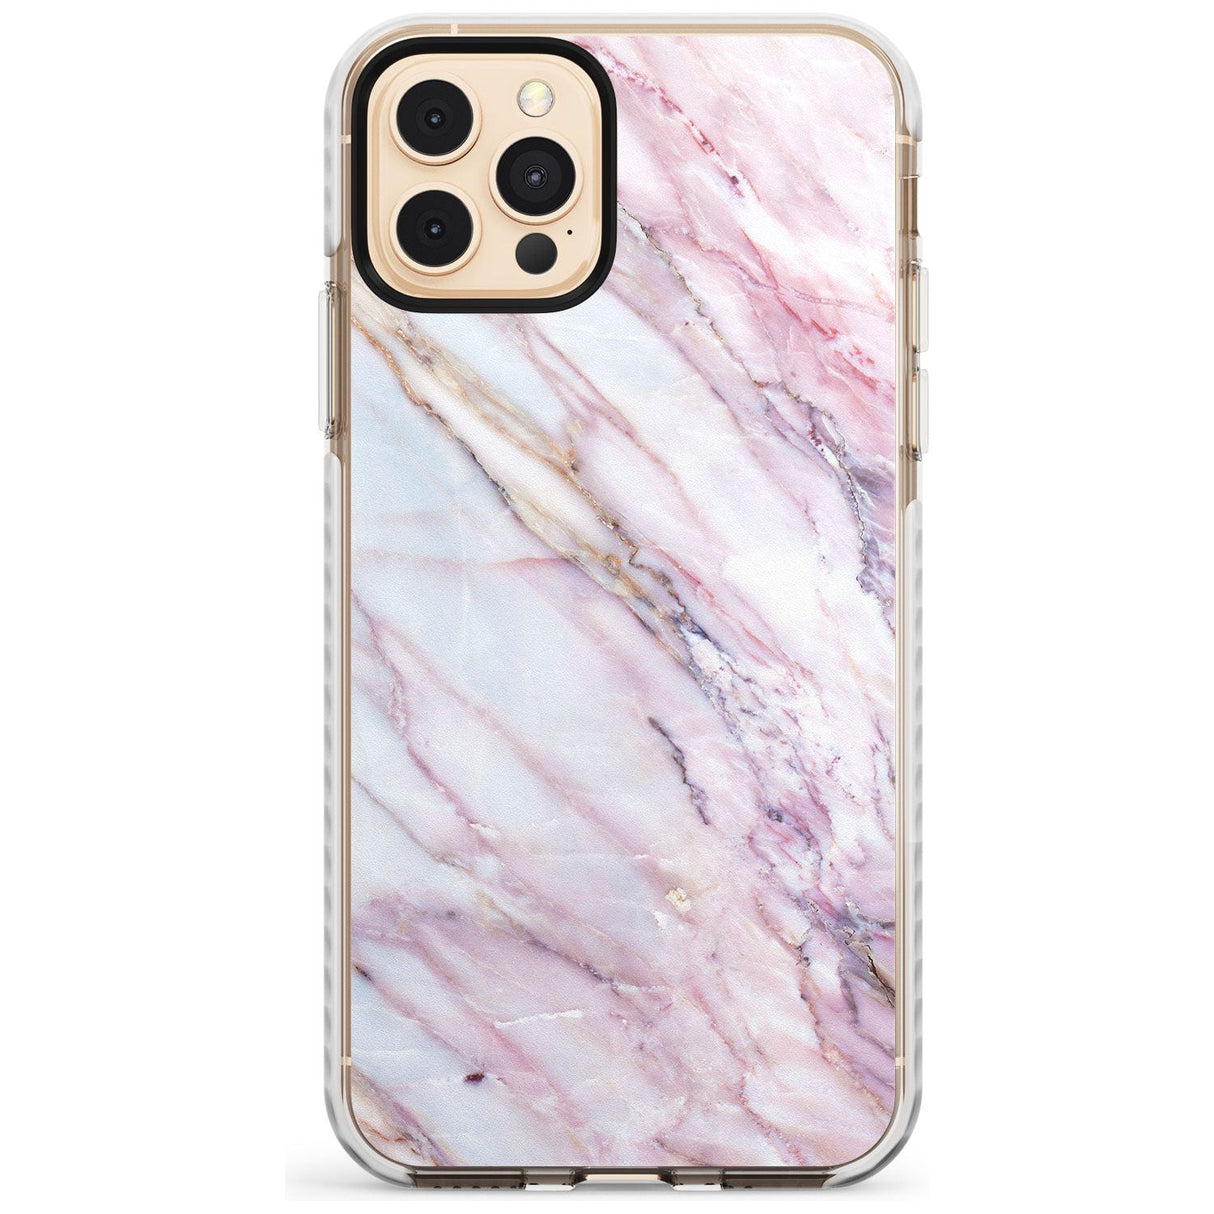 White, Pink & Purple Onyx Marble Texture Slim TPU Phone Case for iPhone 11 Pro Max